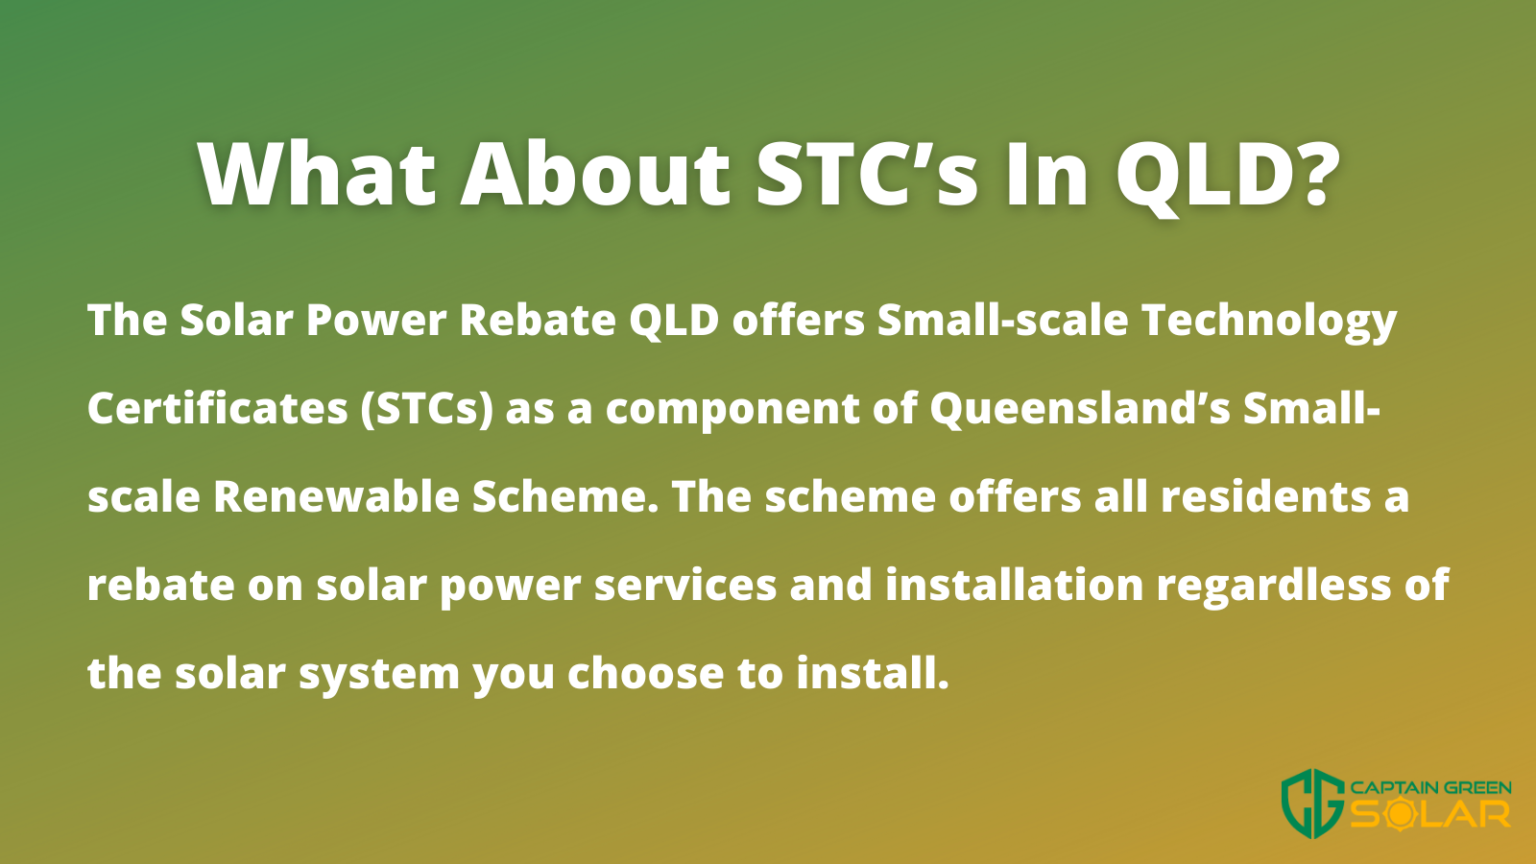 qld-solar-rebate-how-much-is-it-am-i-eligible-powerrebate